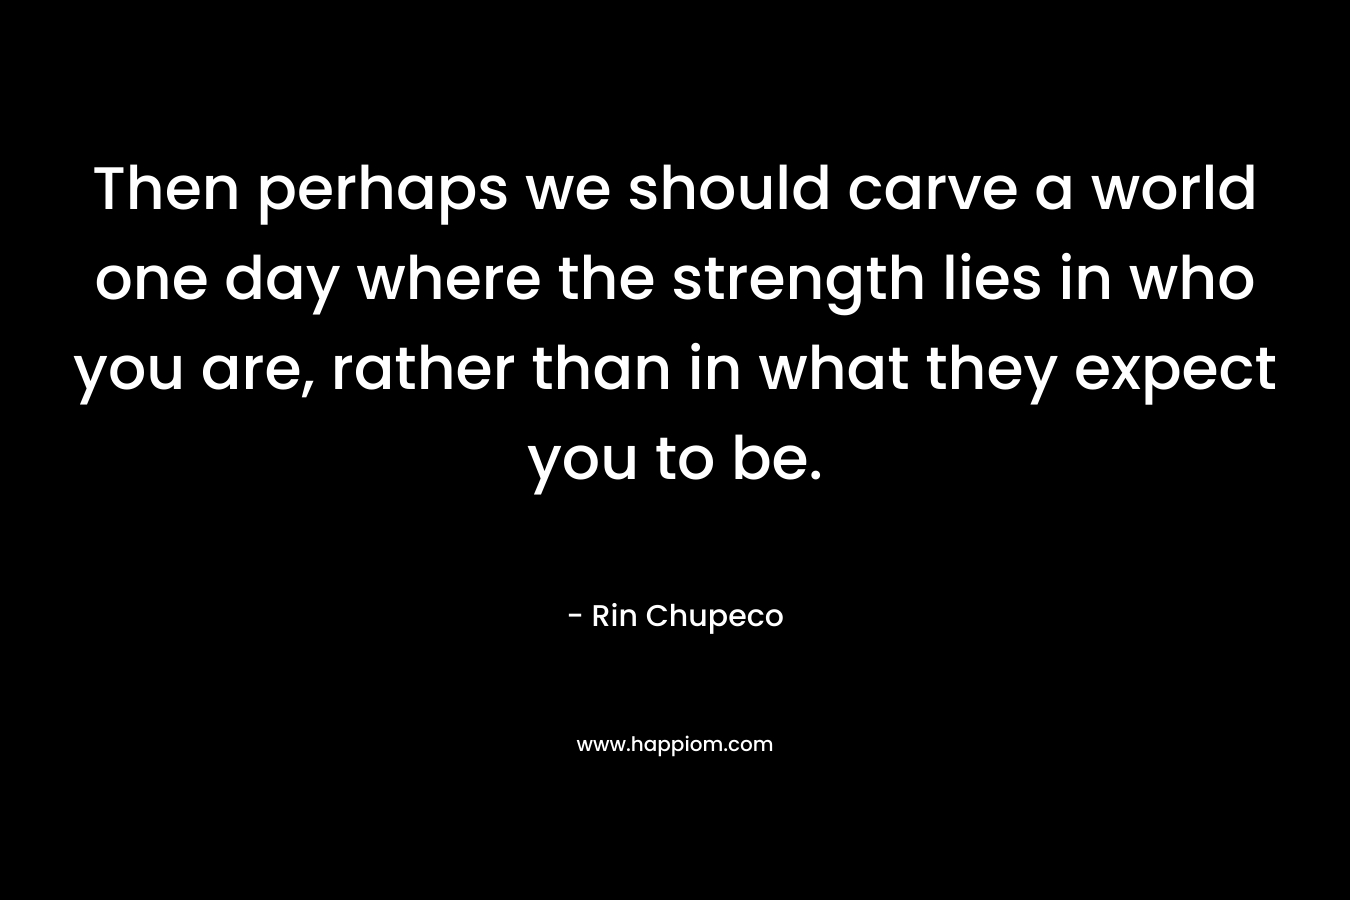 Then perhaps we should carve a world one day where the strength lies in who you are, rather than in what they expect you to be.